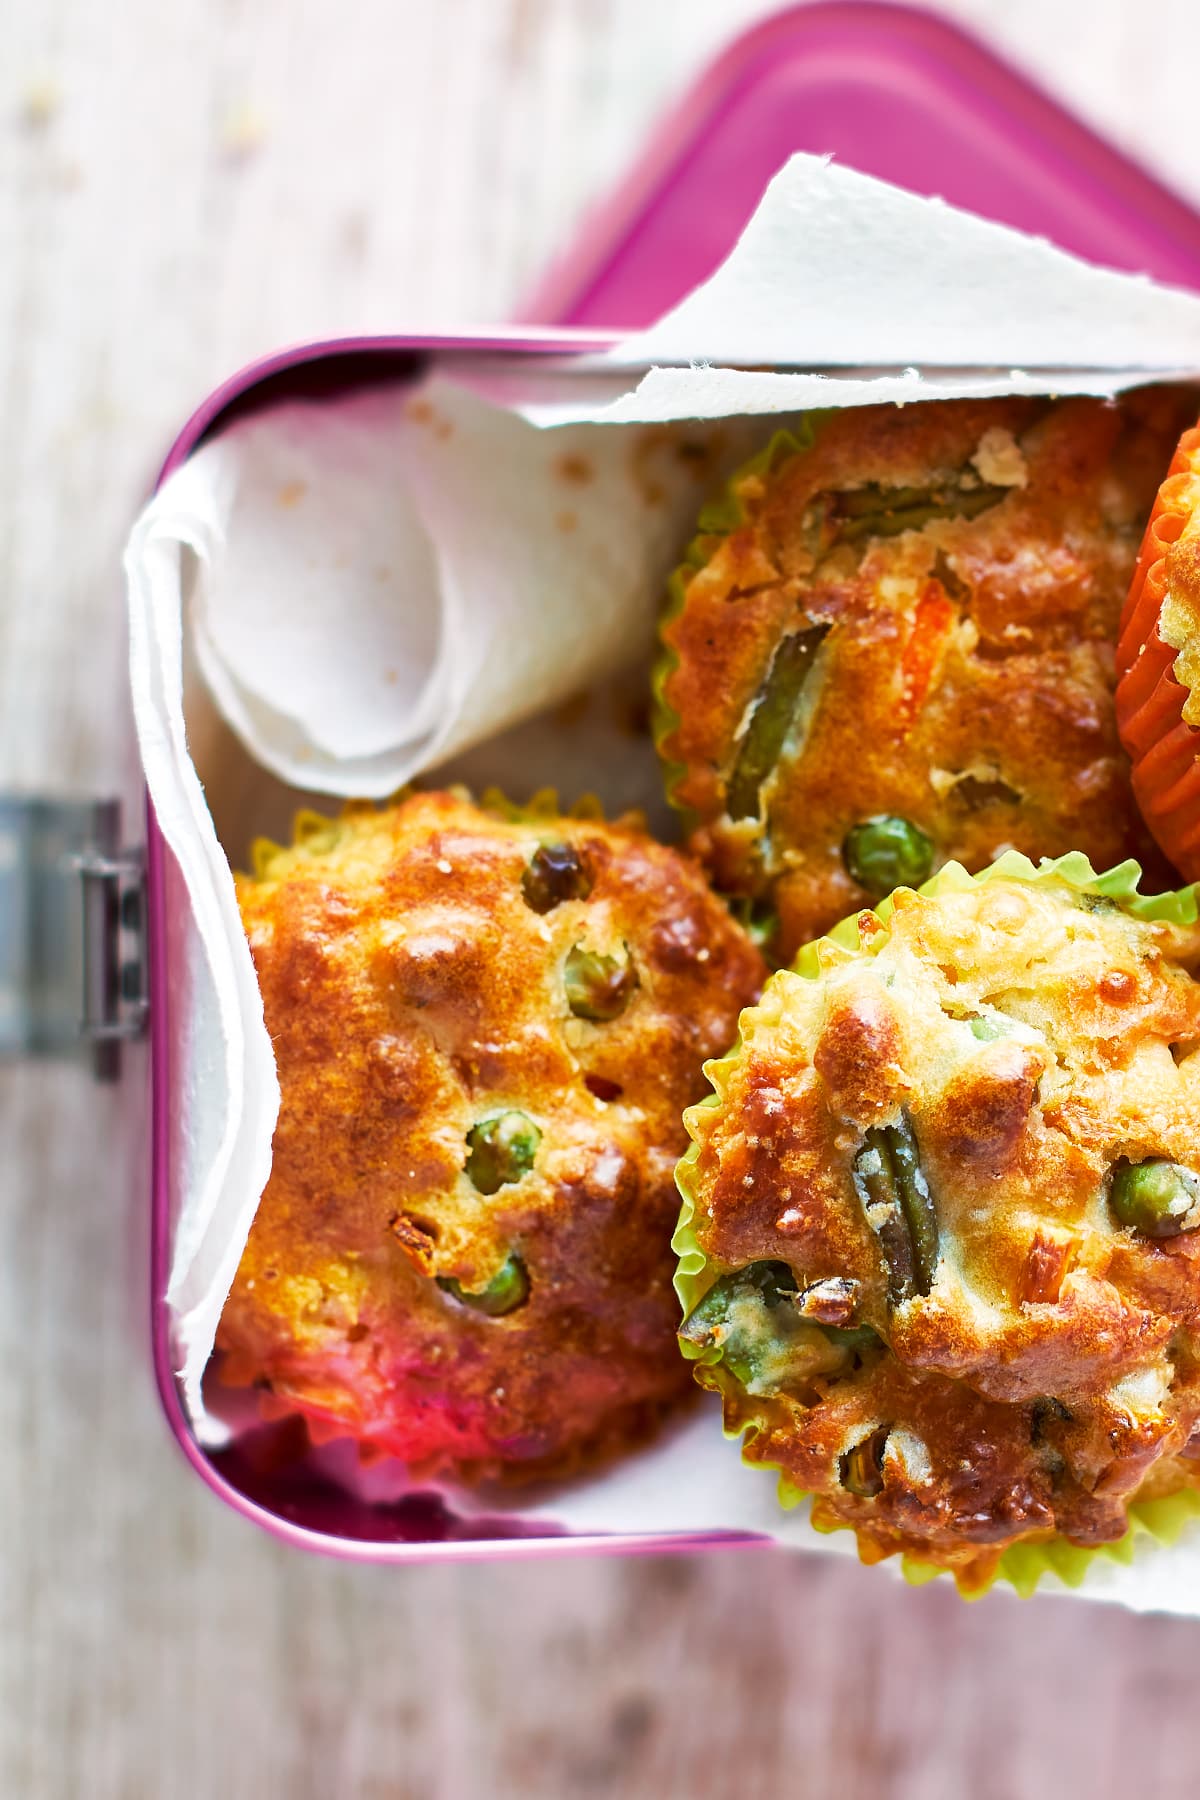 Savoury vegetable muffins in a pink lunchbox lined with paper. The muffins are in multicoloured cases and the tops are studded with carrots, peas, beans and sweetcorn.